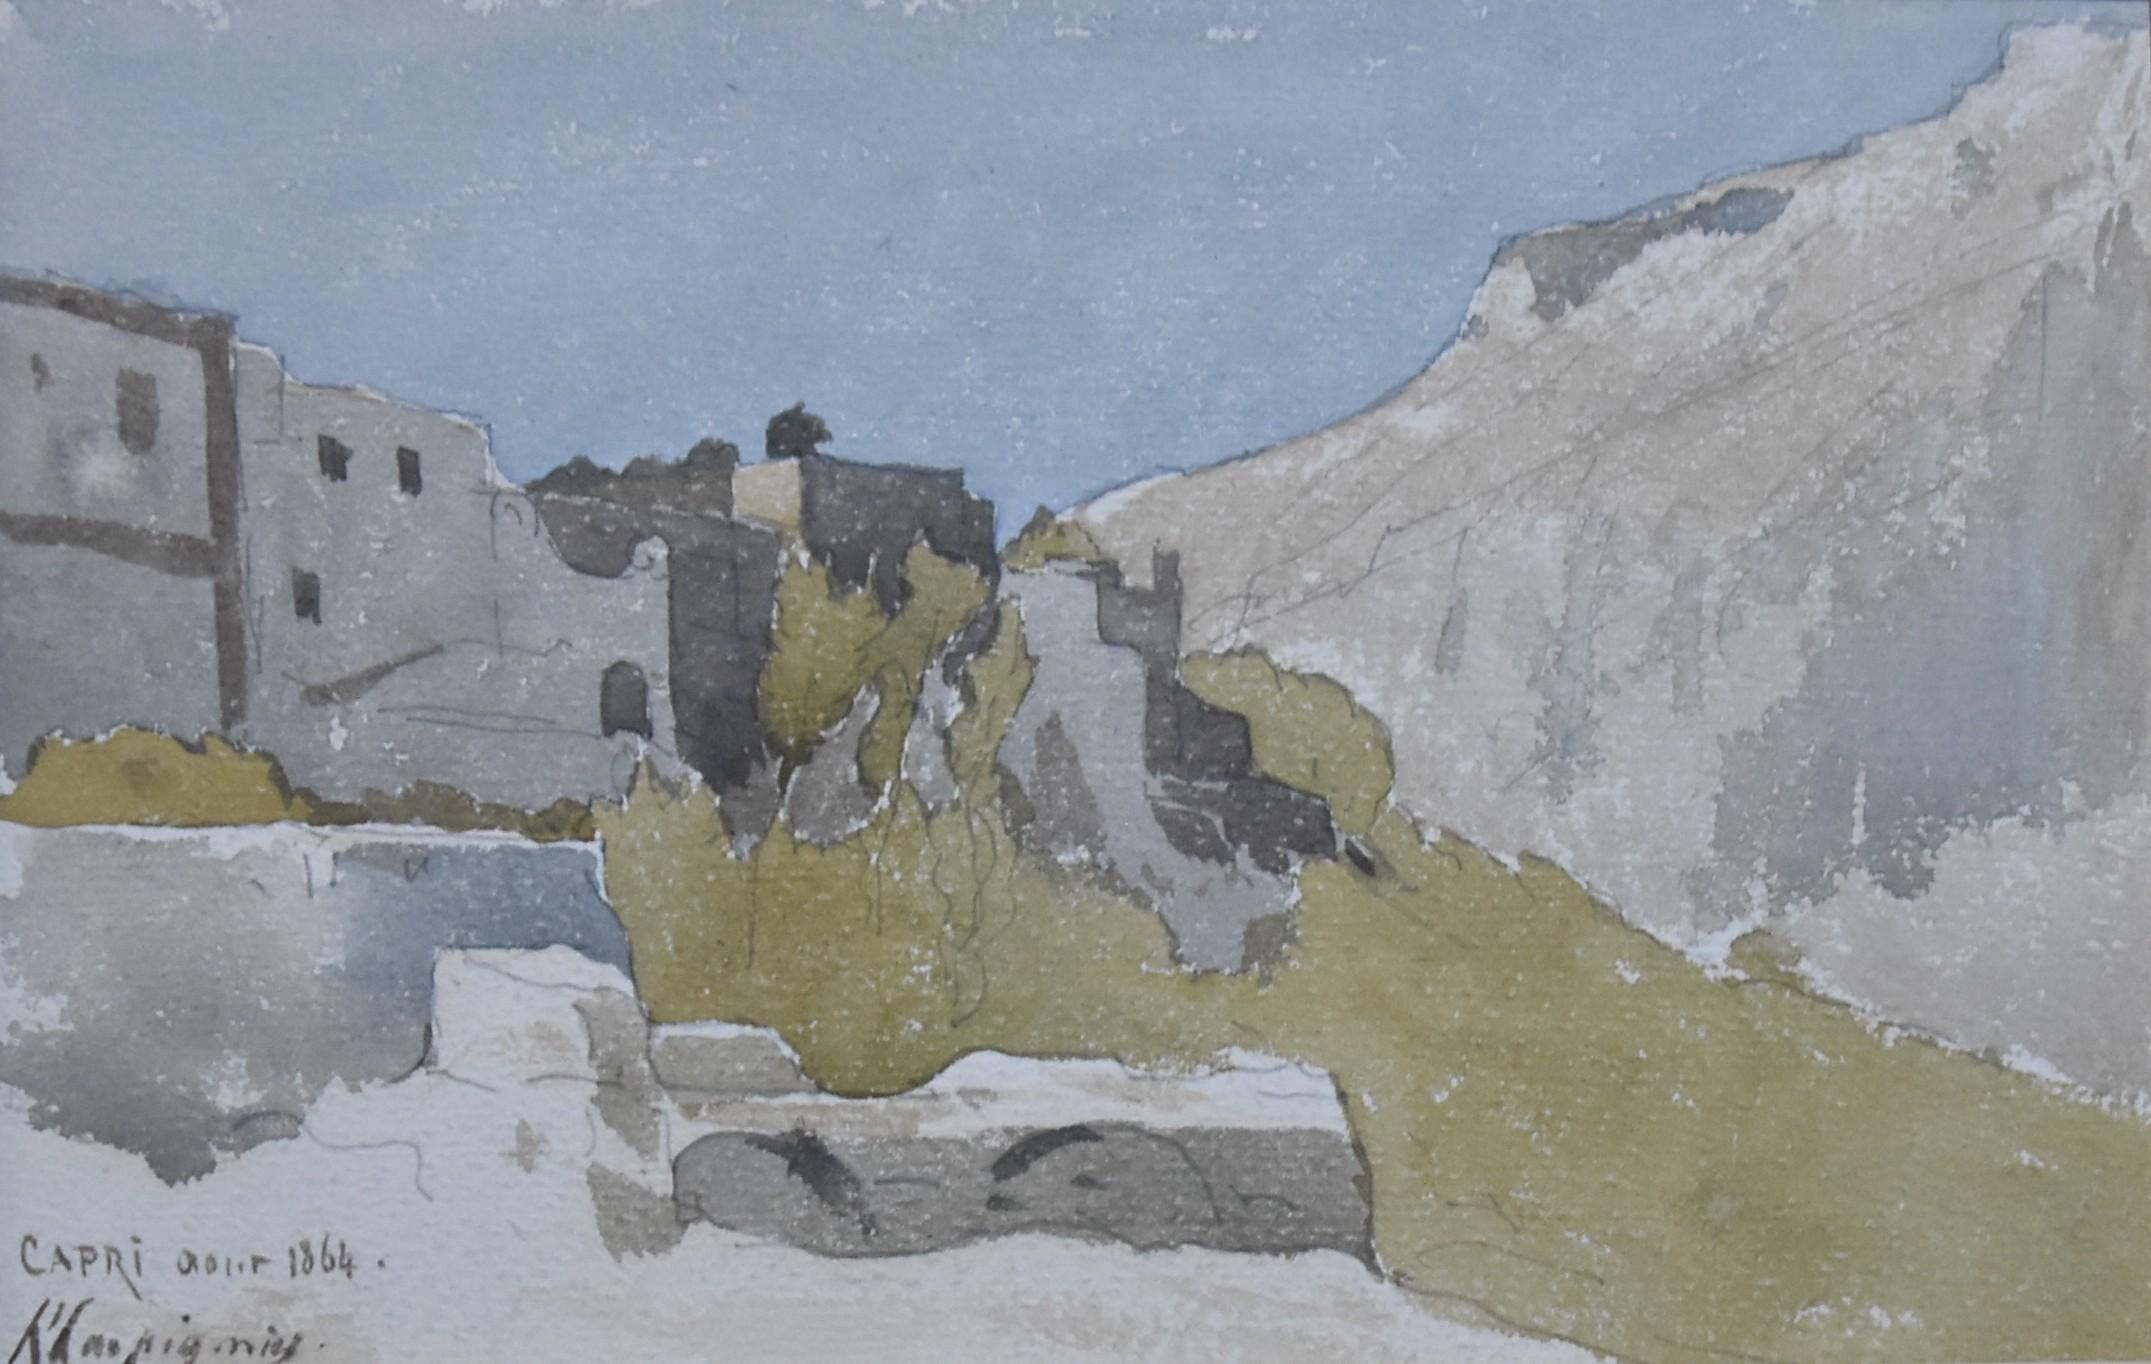 Henri Joseph Harpignies (1819-1916) 
View of capri, 1864, 
signed and dated "Capri aout 1864" lower left
Watercolor on paper
14 x 22 cm
In good condition.
Framed : 24.5 x 33.5 cm

Provenance : 
Family of the painter Ernest Lessieux (1845-1925) whom